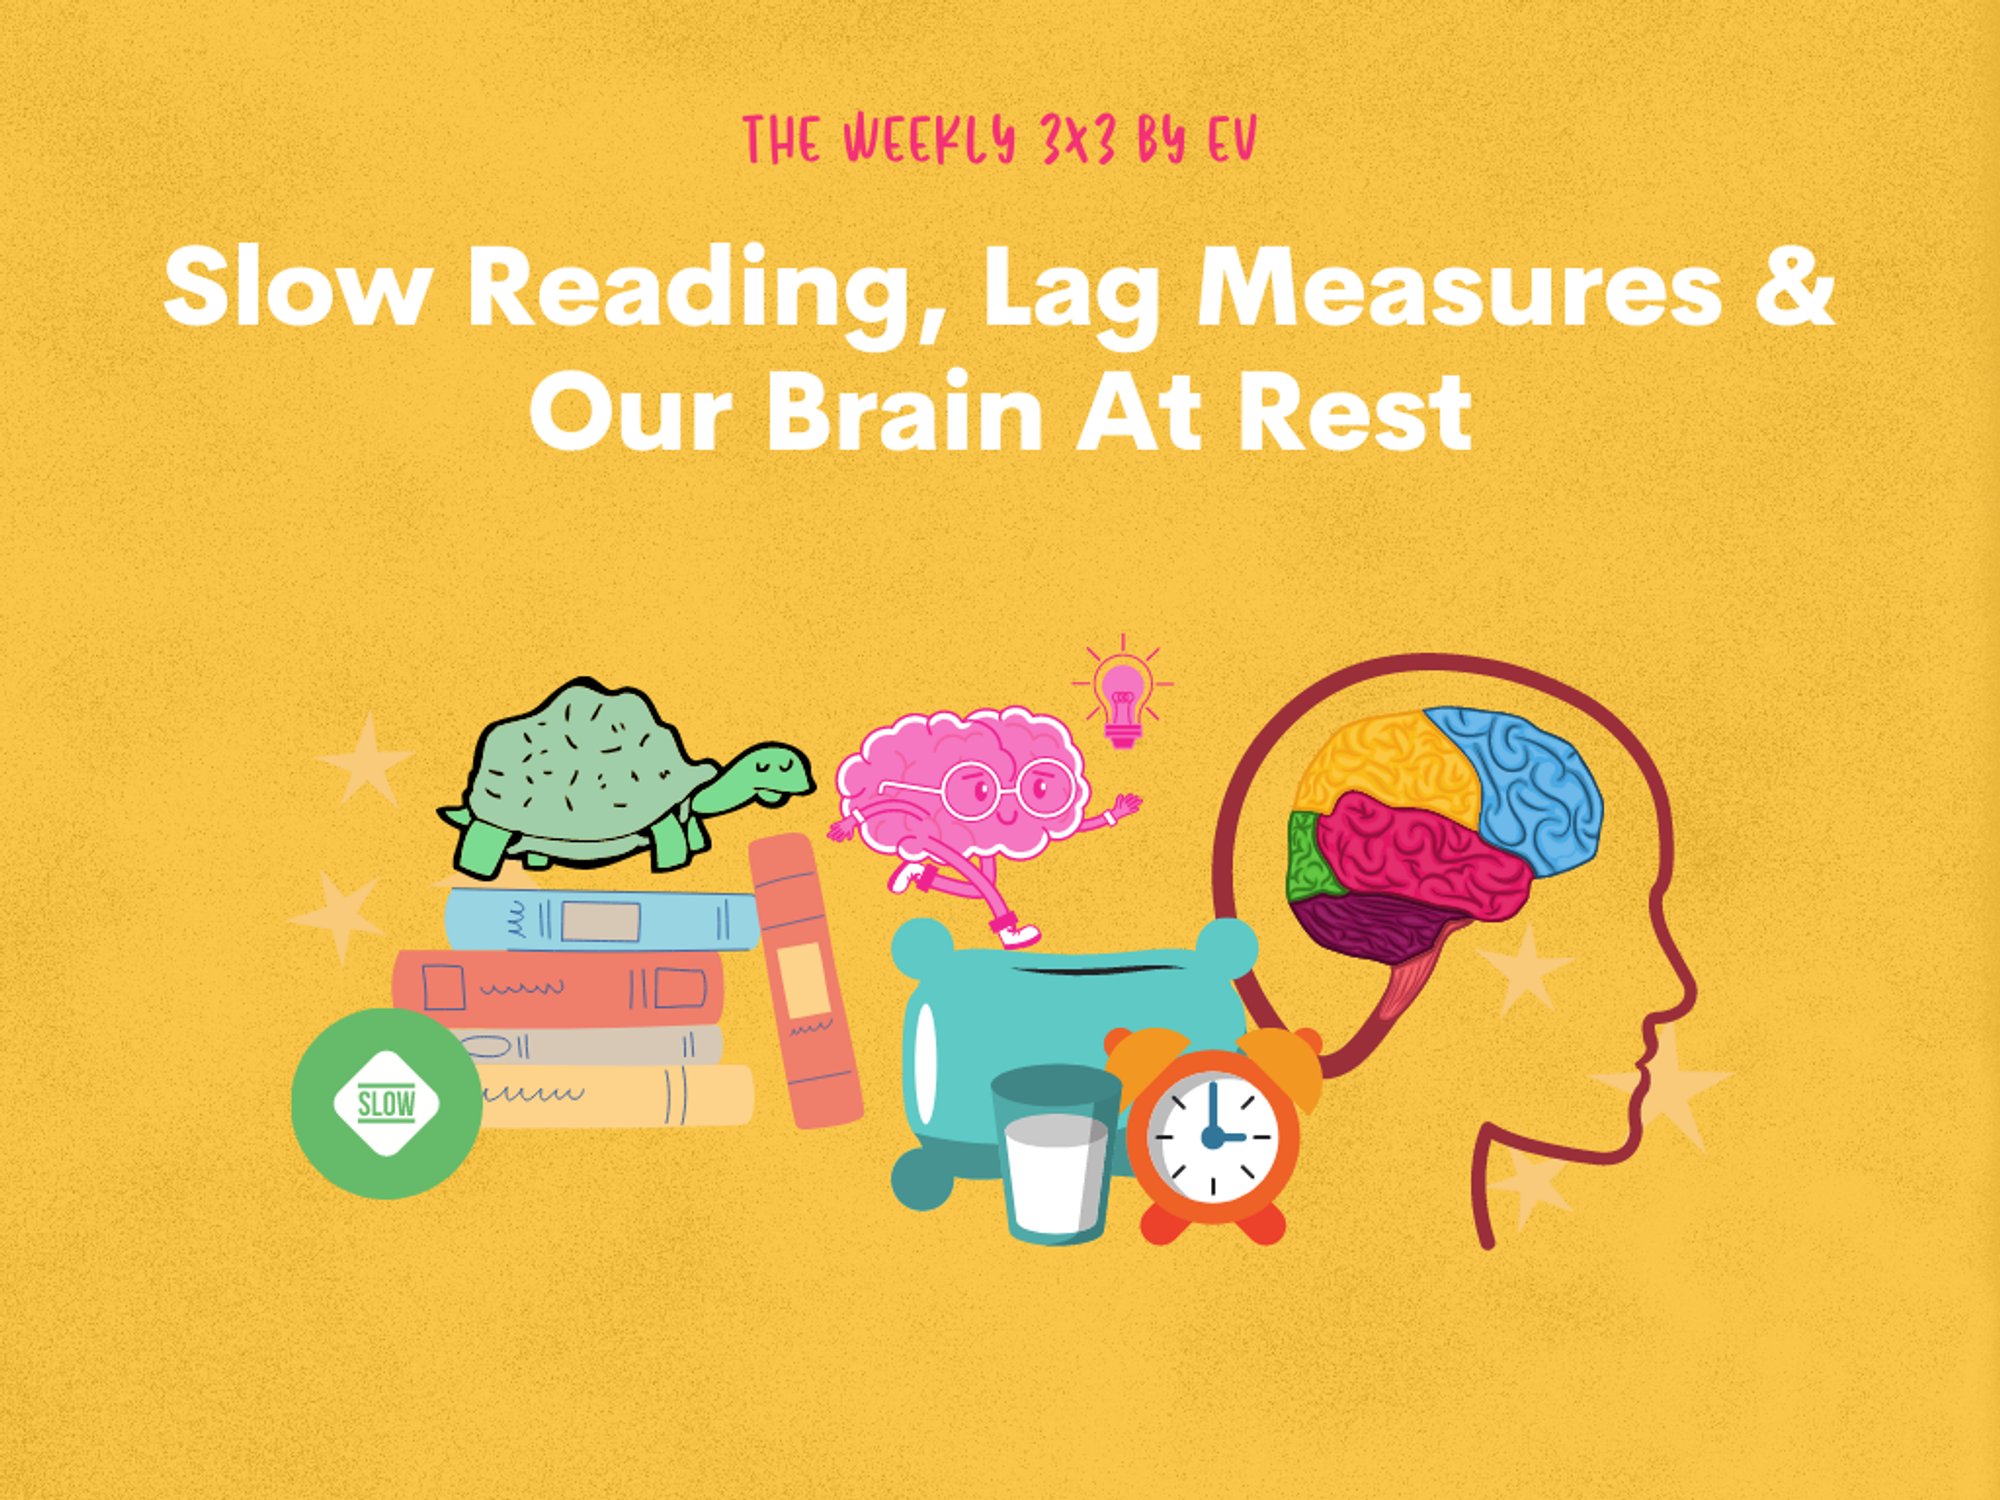 Weekly 3x3 Newsletter: Slow Reading, Lag Measures & Our Brain At Rest